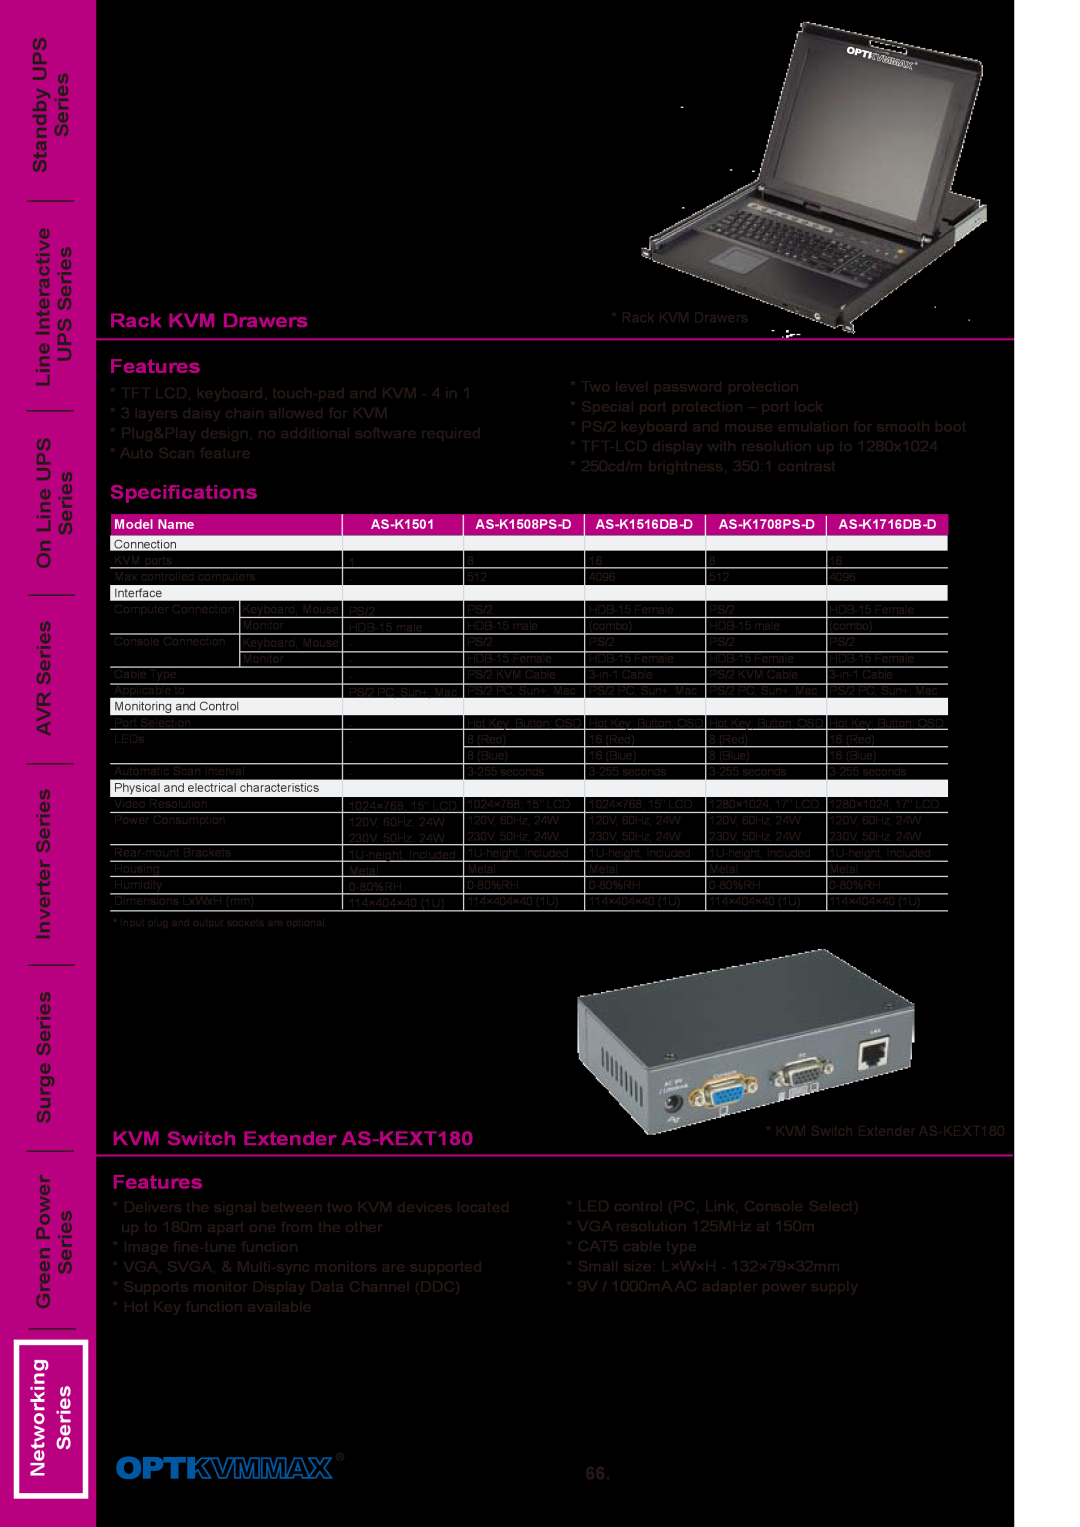 OPTI-UPS AS-KEXT180 specifications Series, Networking, Rack KVM Drawers, Features, Specifications 